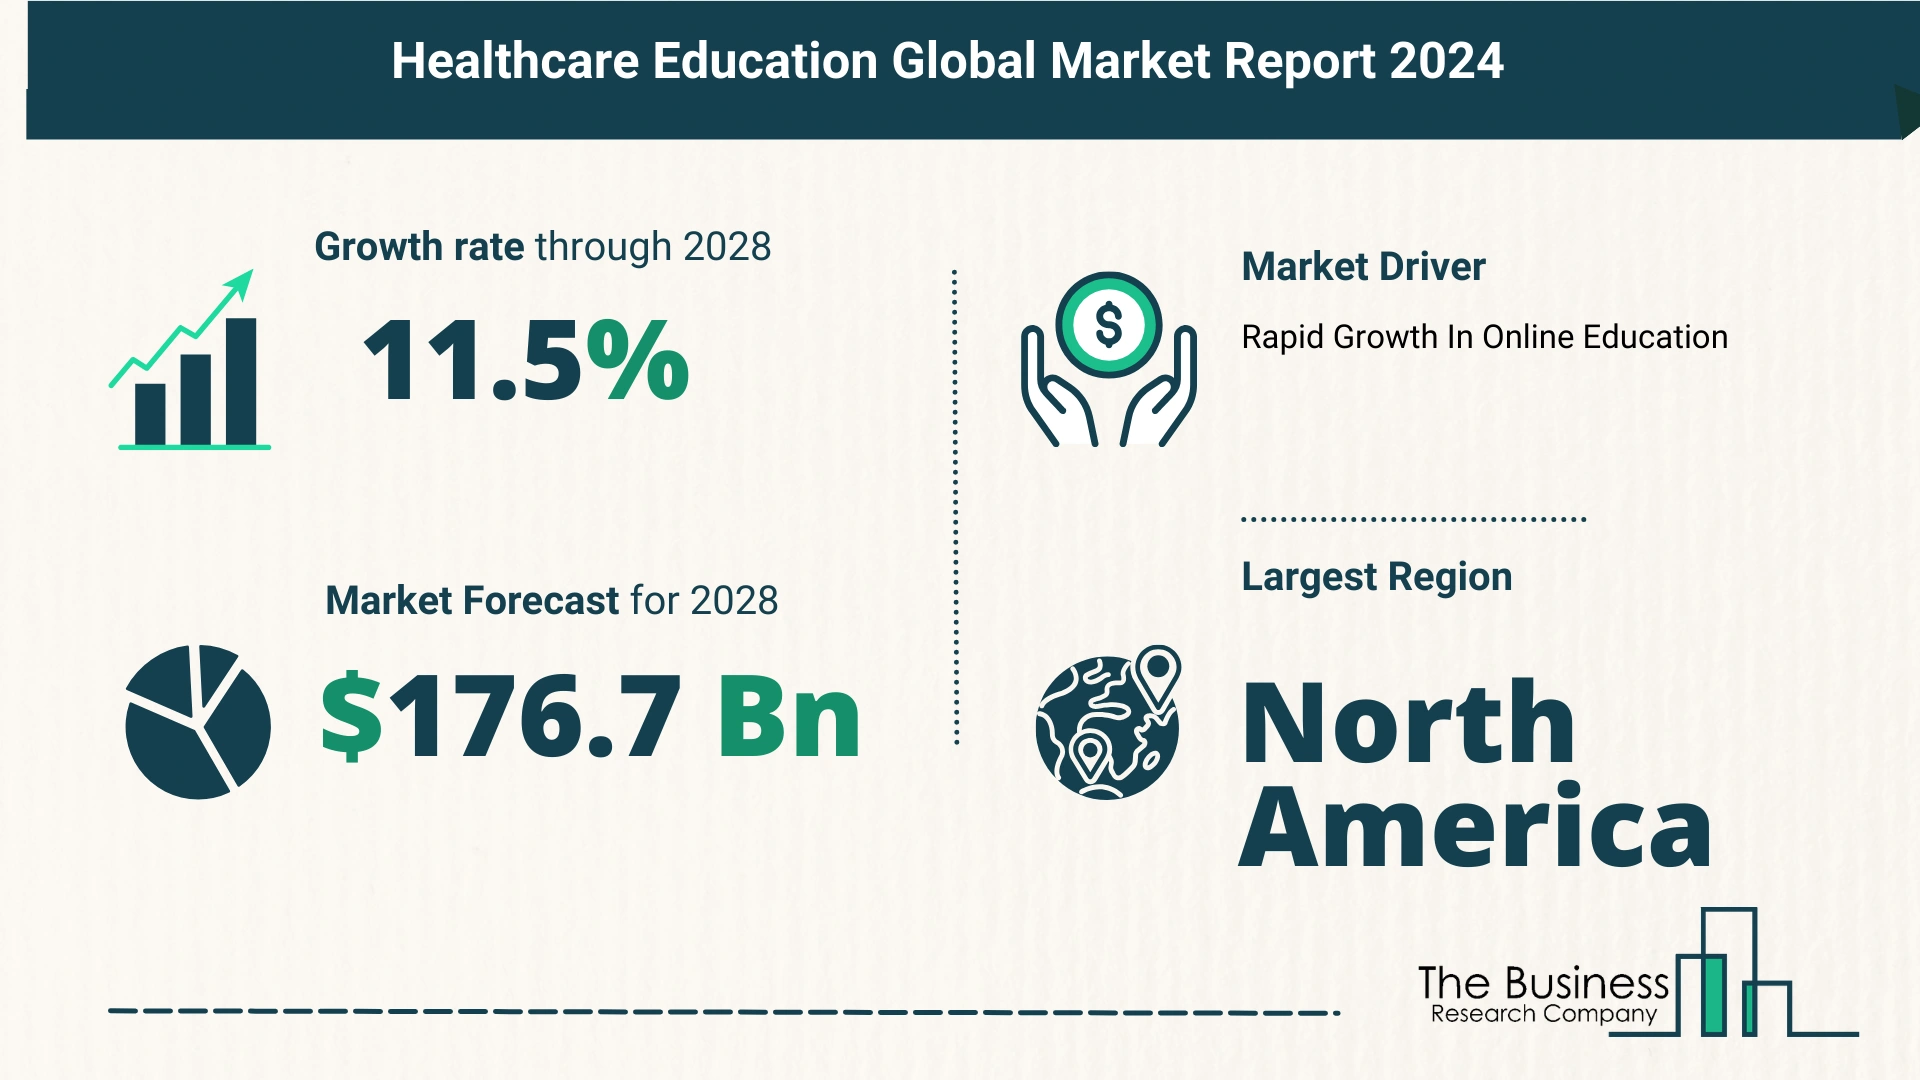 Global Healthcare Education Market Overview 2024: Size, Drivers, And Trends